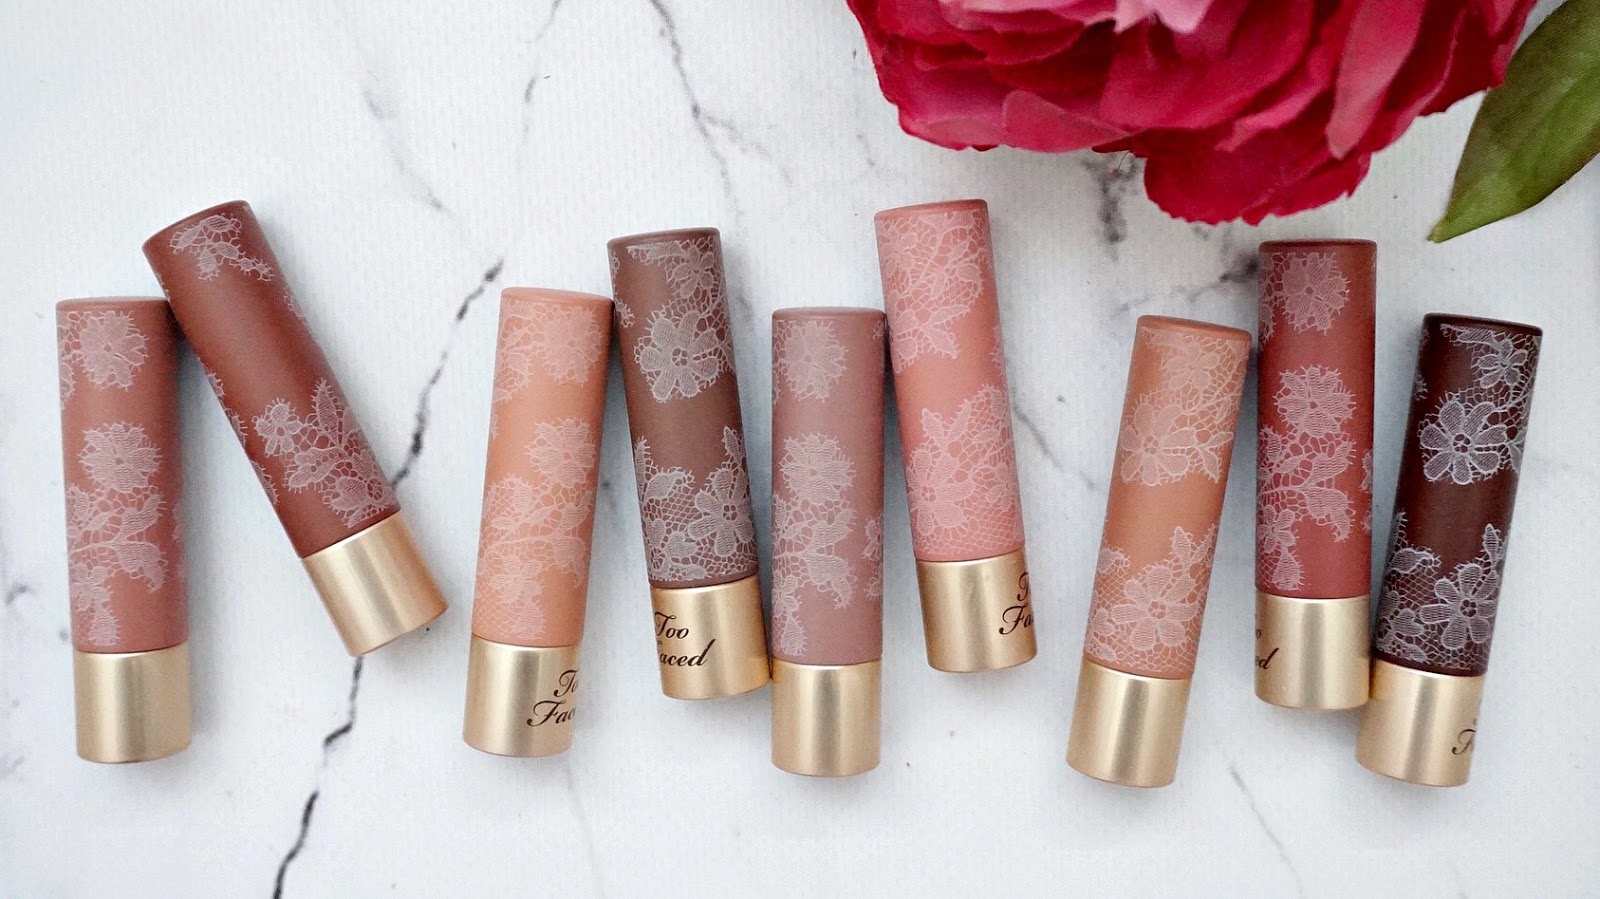 miranda loves: Review & Swatch: Too Faced Natural Nudes Lipsticks* .